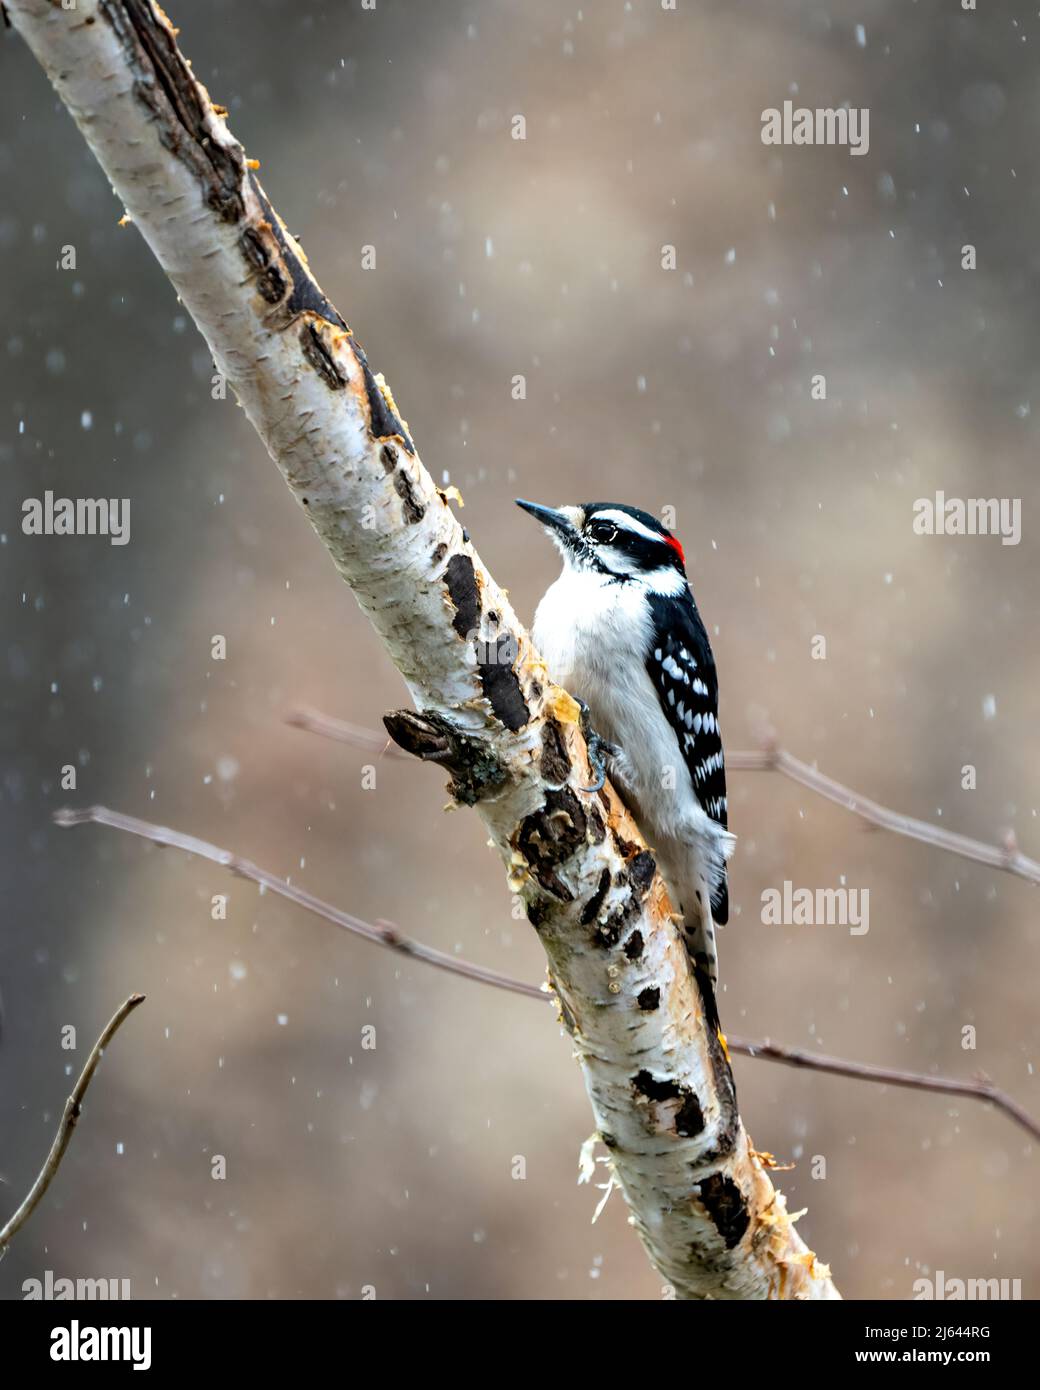 Woodpecker male close-up profile view perched on a birch tree branch with falling snow and blur background in its environment and habitat. Image. Pict Stock Photo